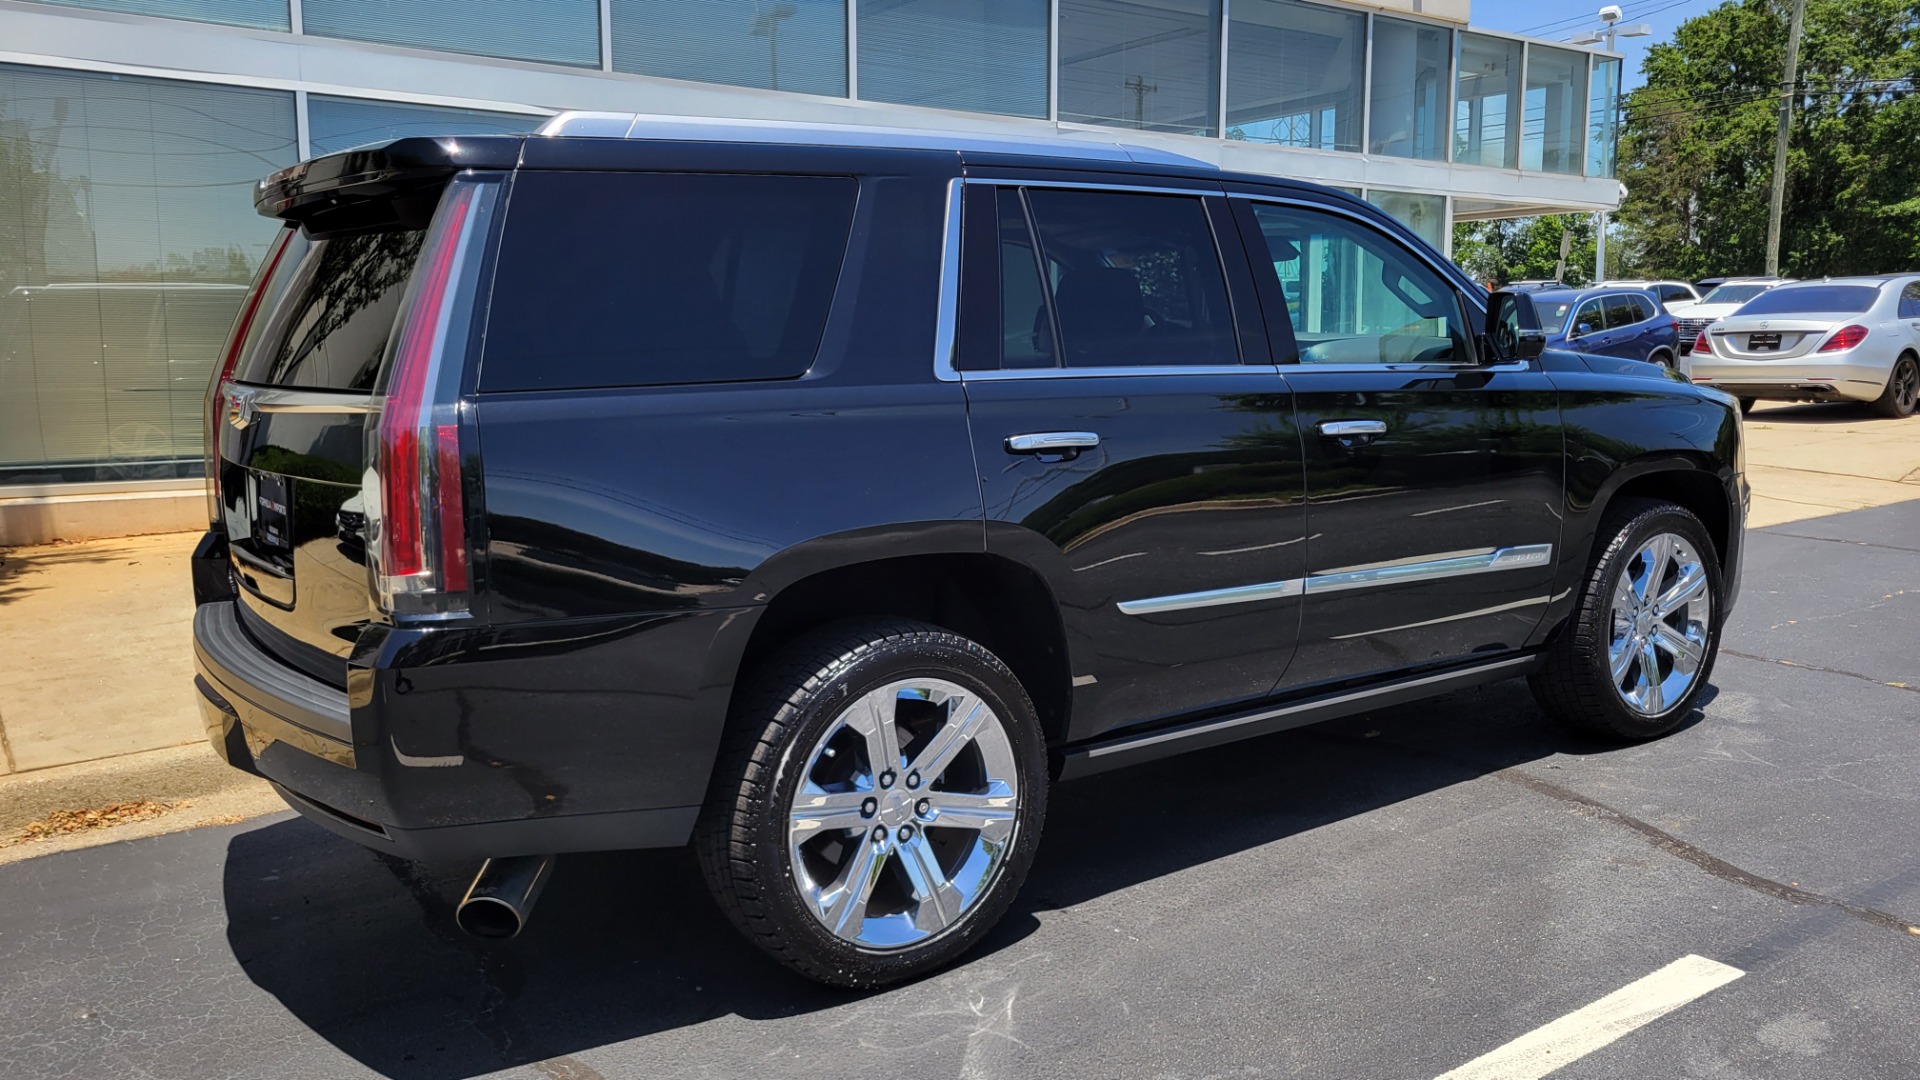 Used 2016 Cadillac ESCALADE PREMIUM COLLECTION / 6.2L / 4X4 / NAV / DVD / SUNROOF / 3-ROW for sale $58,995 at Formula Imports in Charlotte NC 28227 7